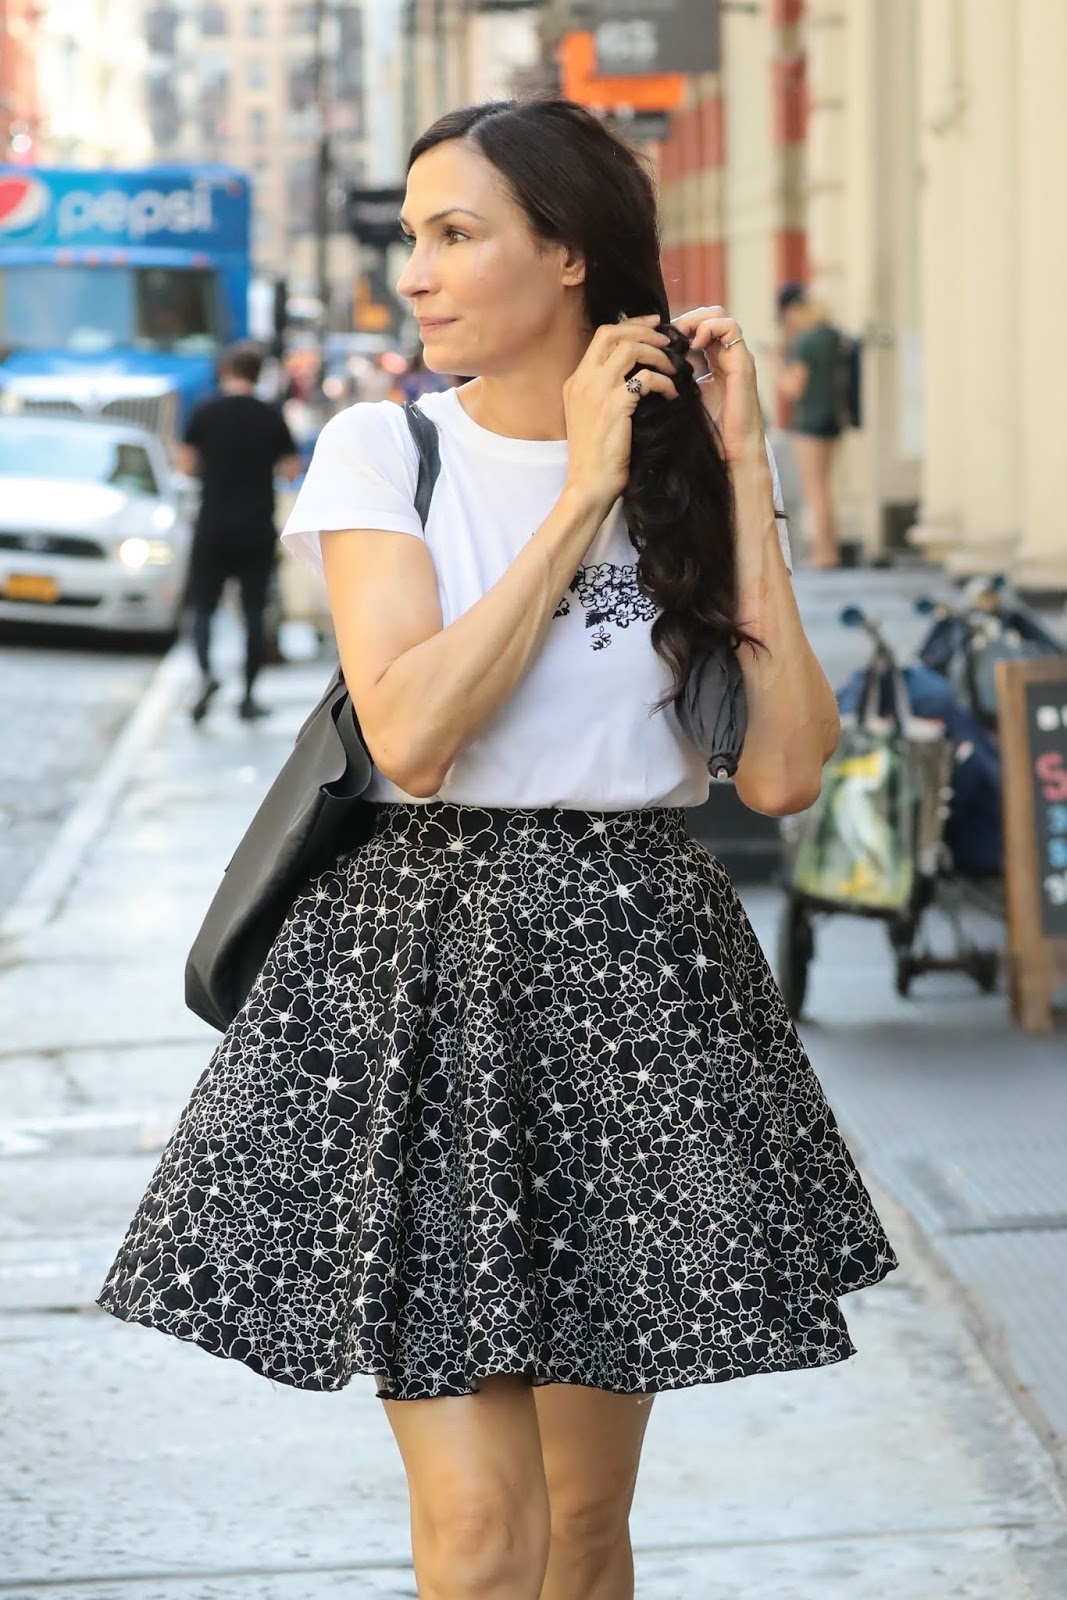 Famke Janssen plays with her hair during a stroll through SoHo 07/31